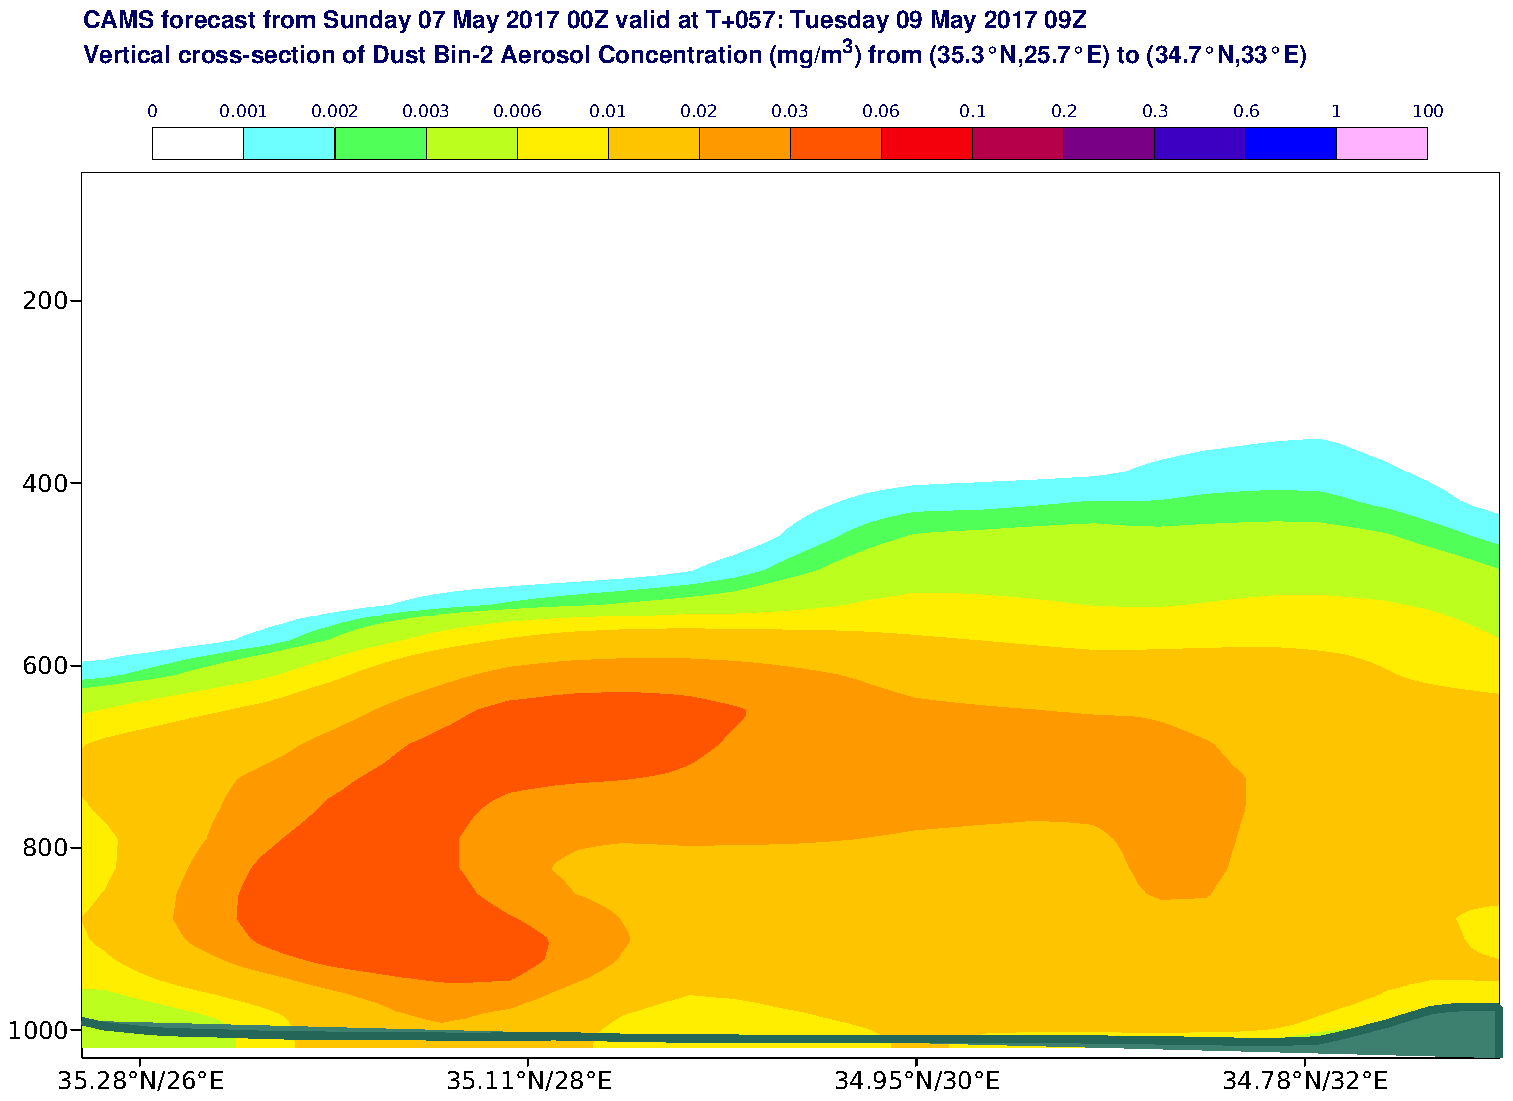 Vertical cross-section of Dust Bin-2 Aerosol Concentration (mg/m3) valid at T57 - 2017-05-09 09:00